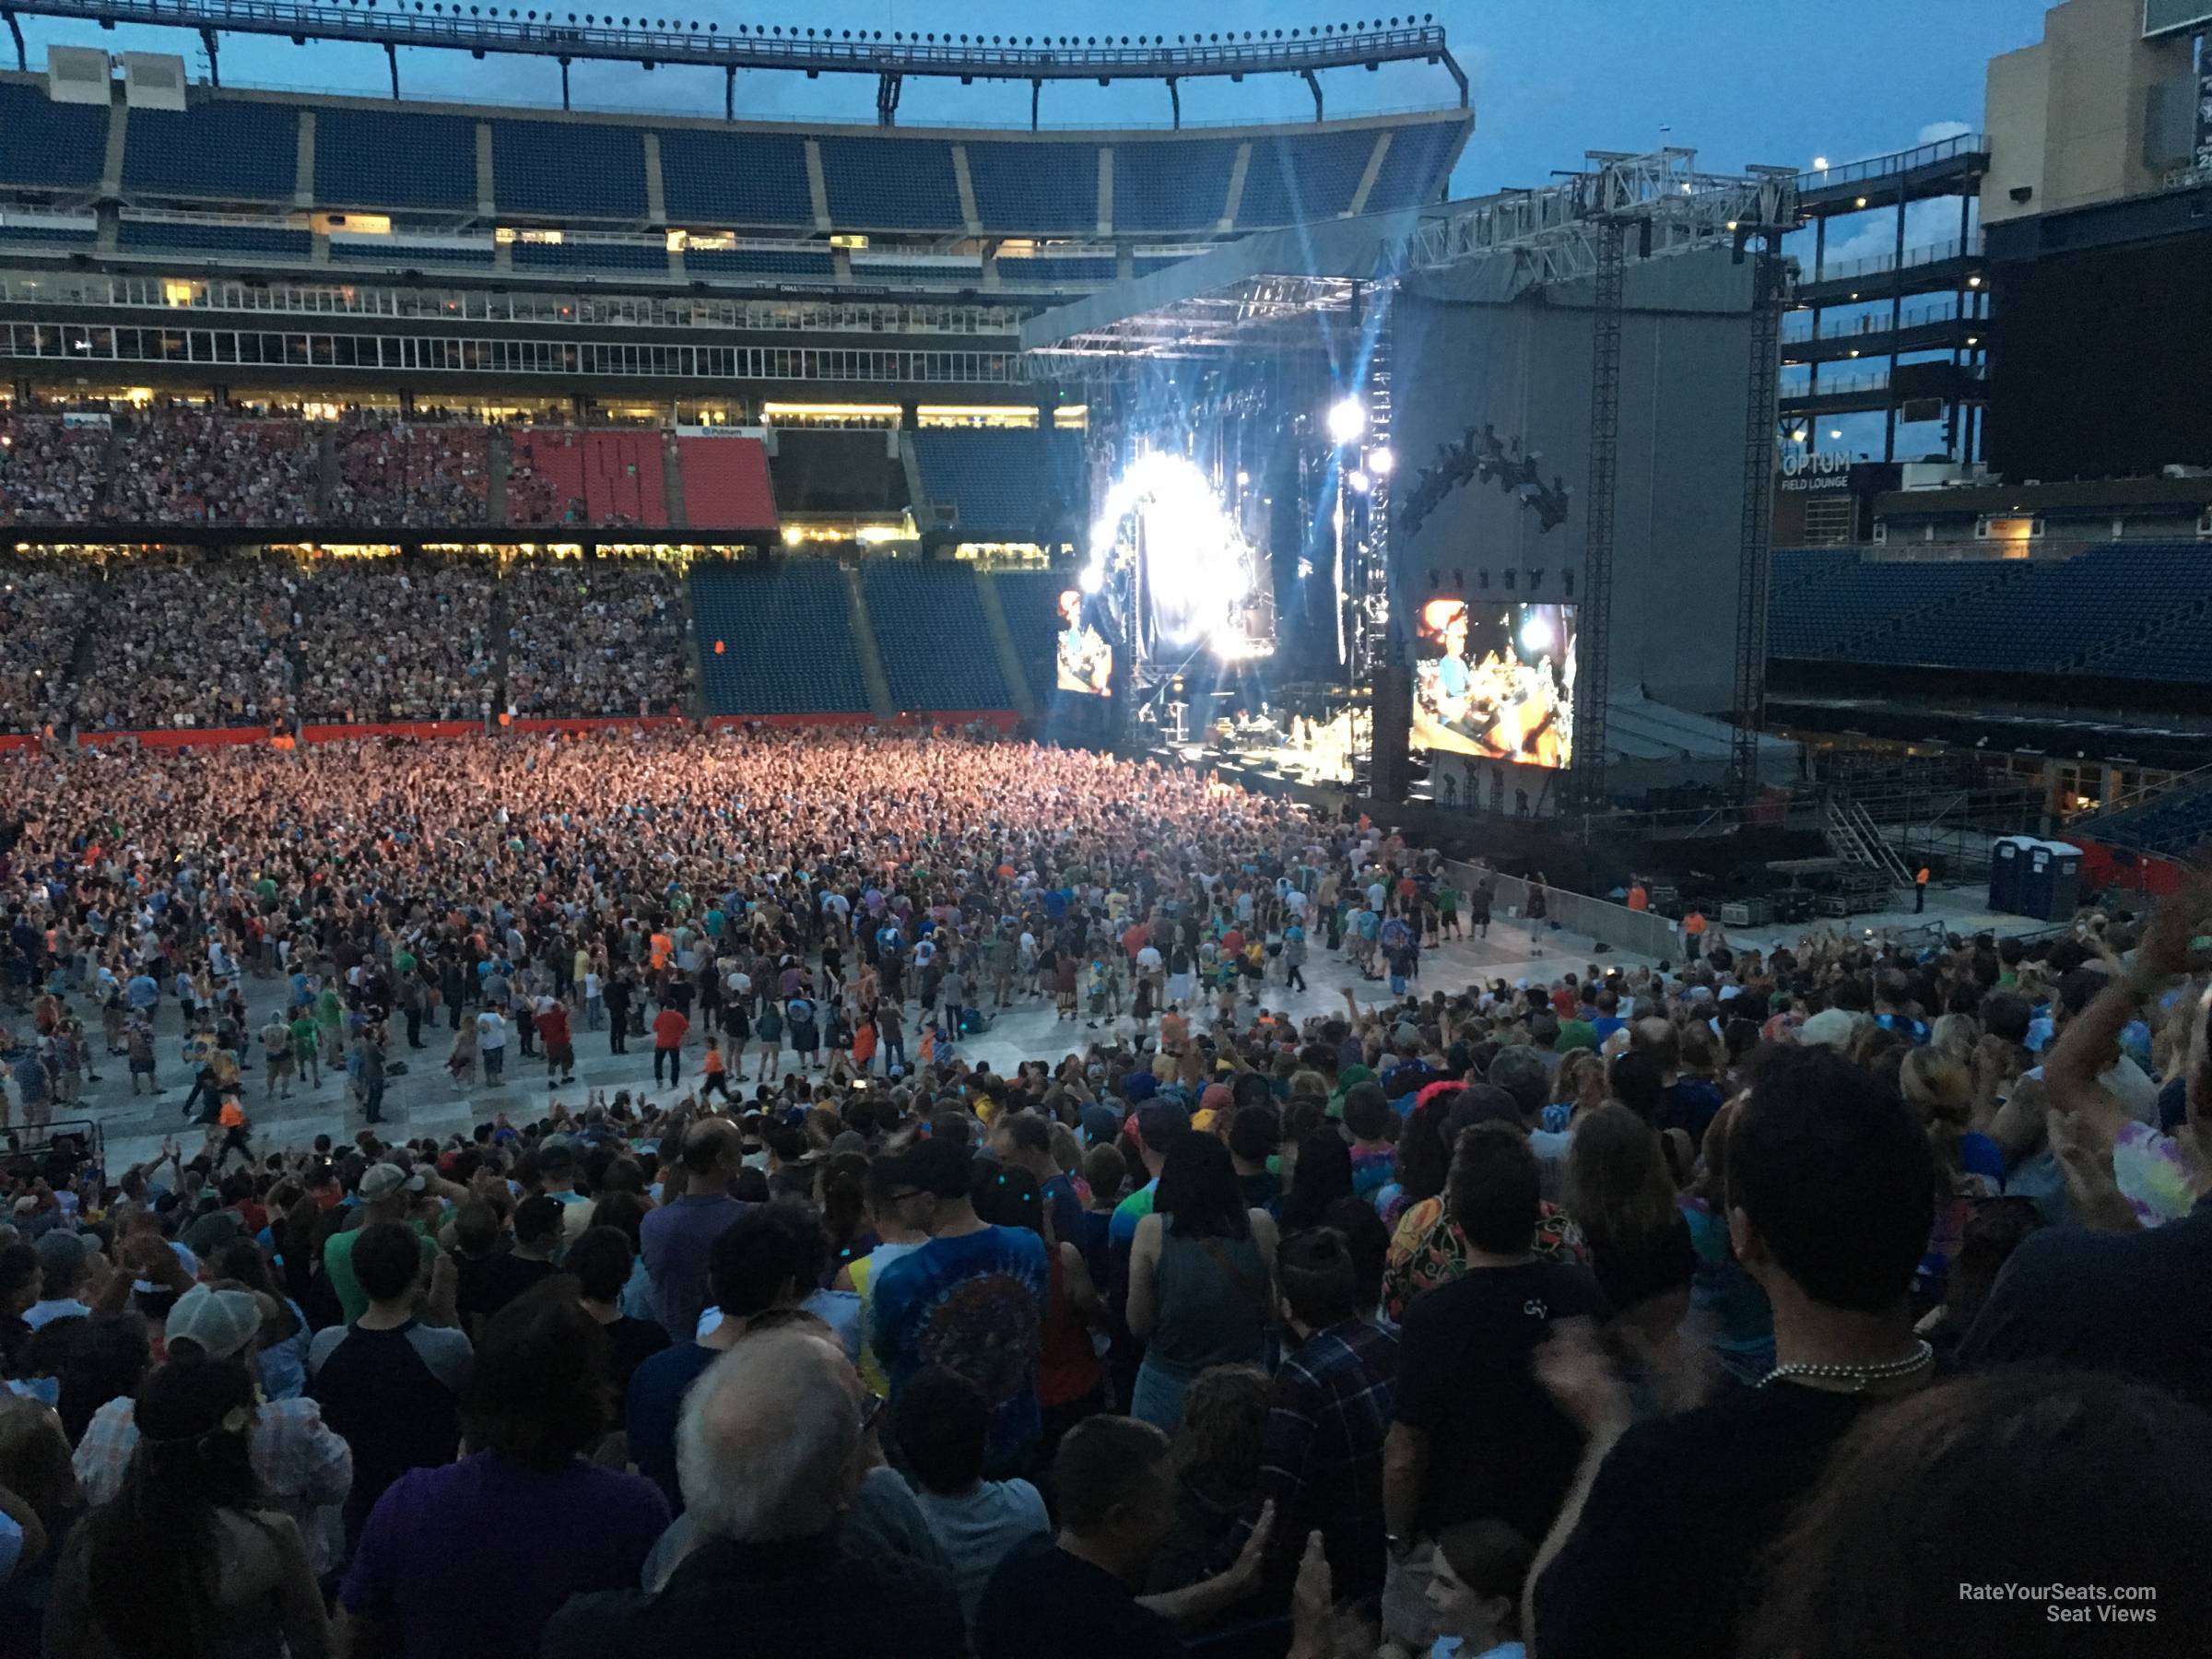 section 130, row 38 seat view  for concert - gillette stadium